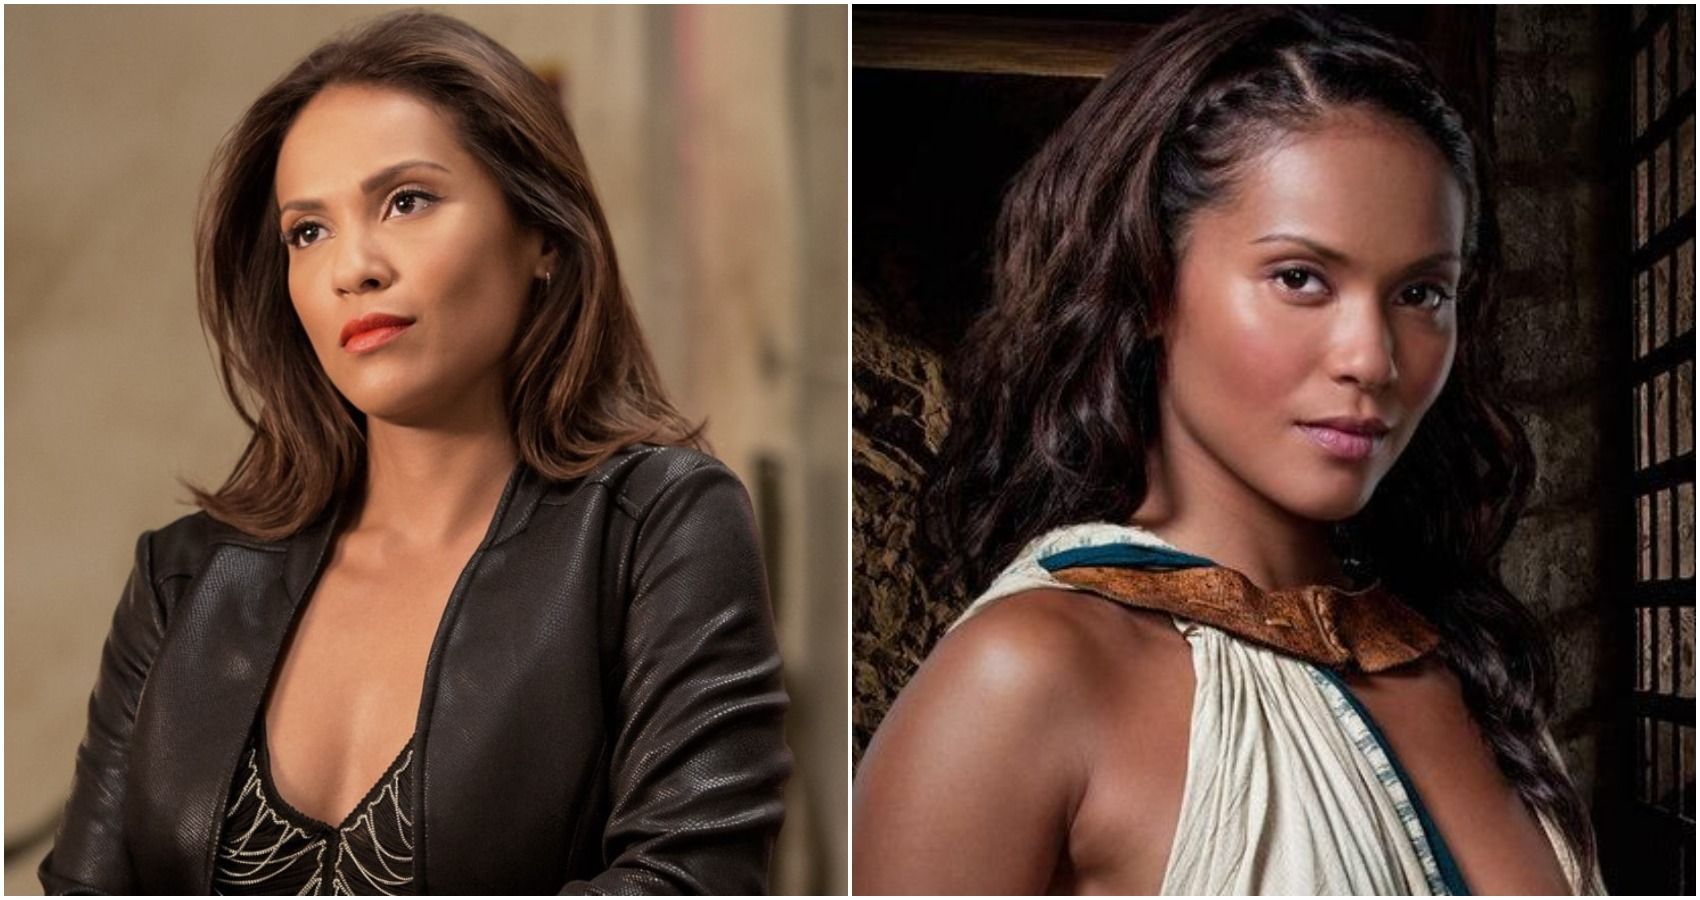 Lesley-Ann Brandt's 10 Best Movies And TV Shows